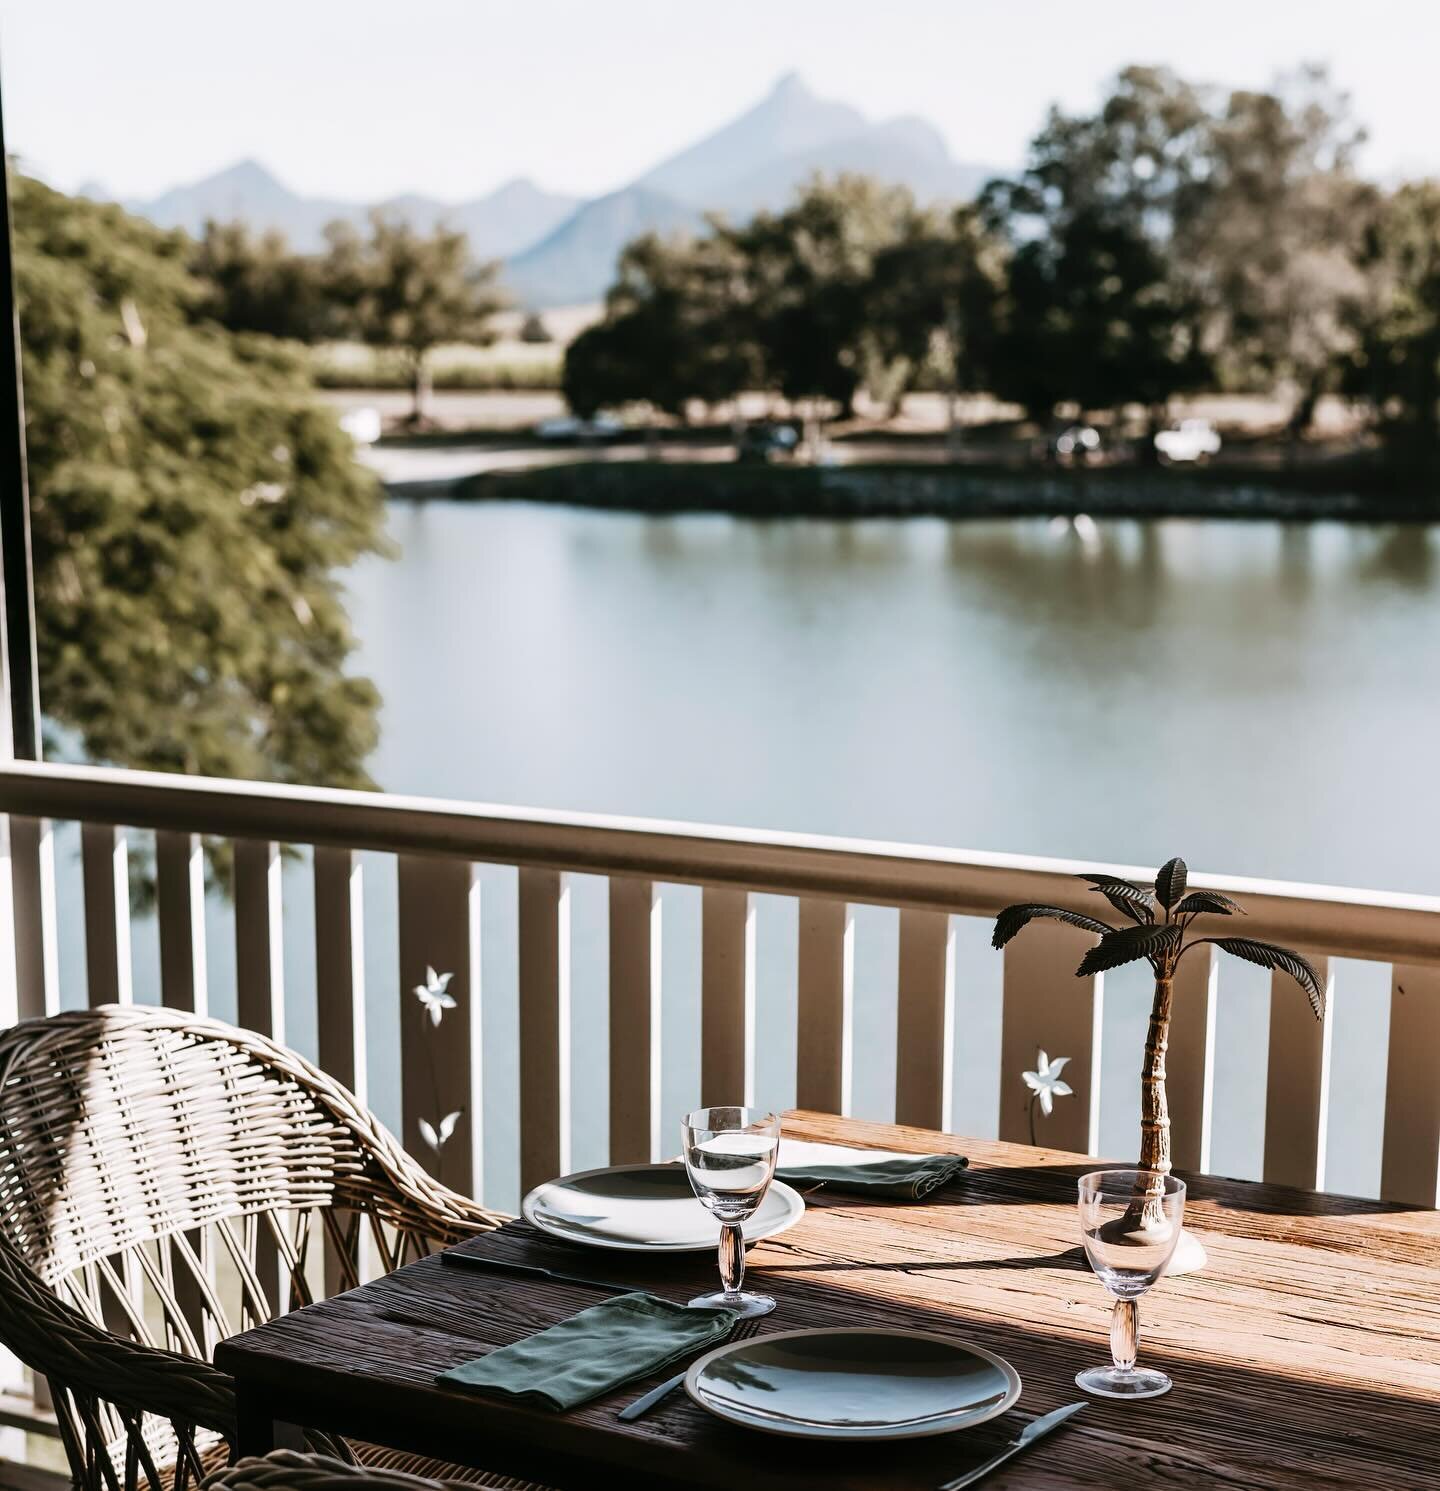 Summer dining on the River Verandah, under the palm fans and cool misting spray - pairs perfectly with a cocktail or chilled glass of bubbles or wine and a long lunch or relaxing dinner!